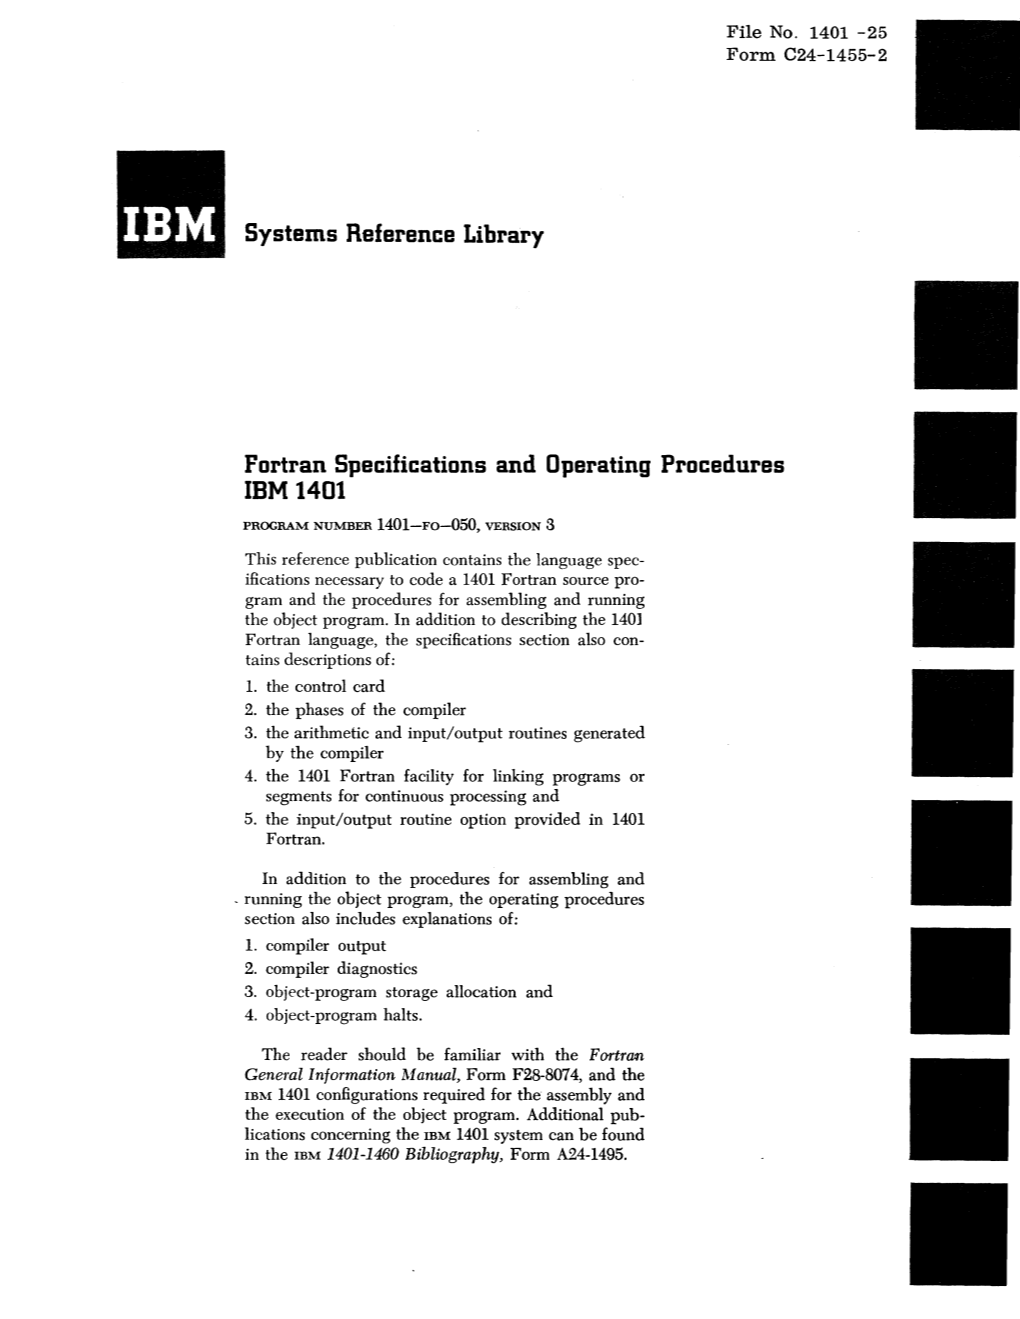 Systems Reference Library Fortran Specifications and Operating